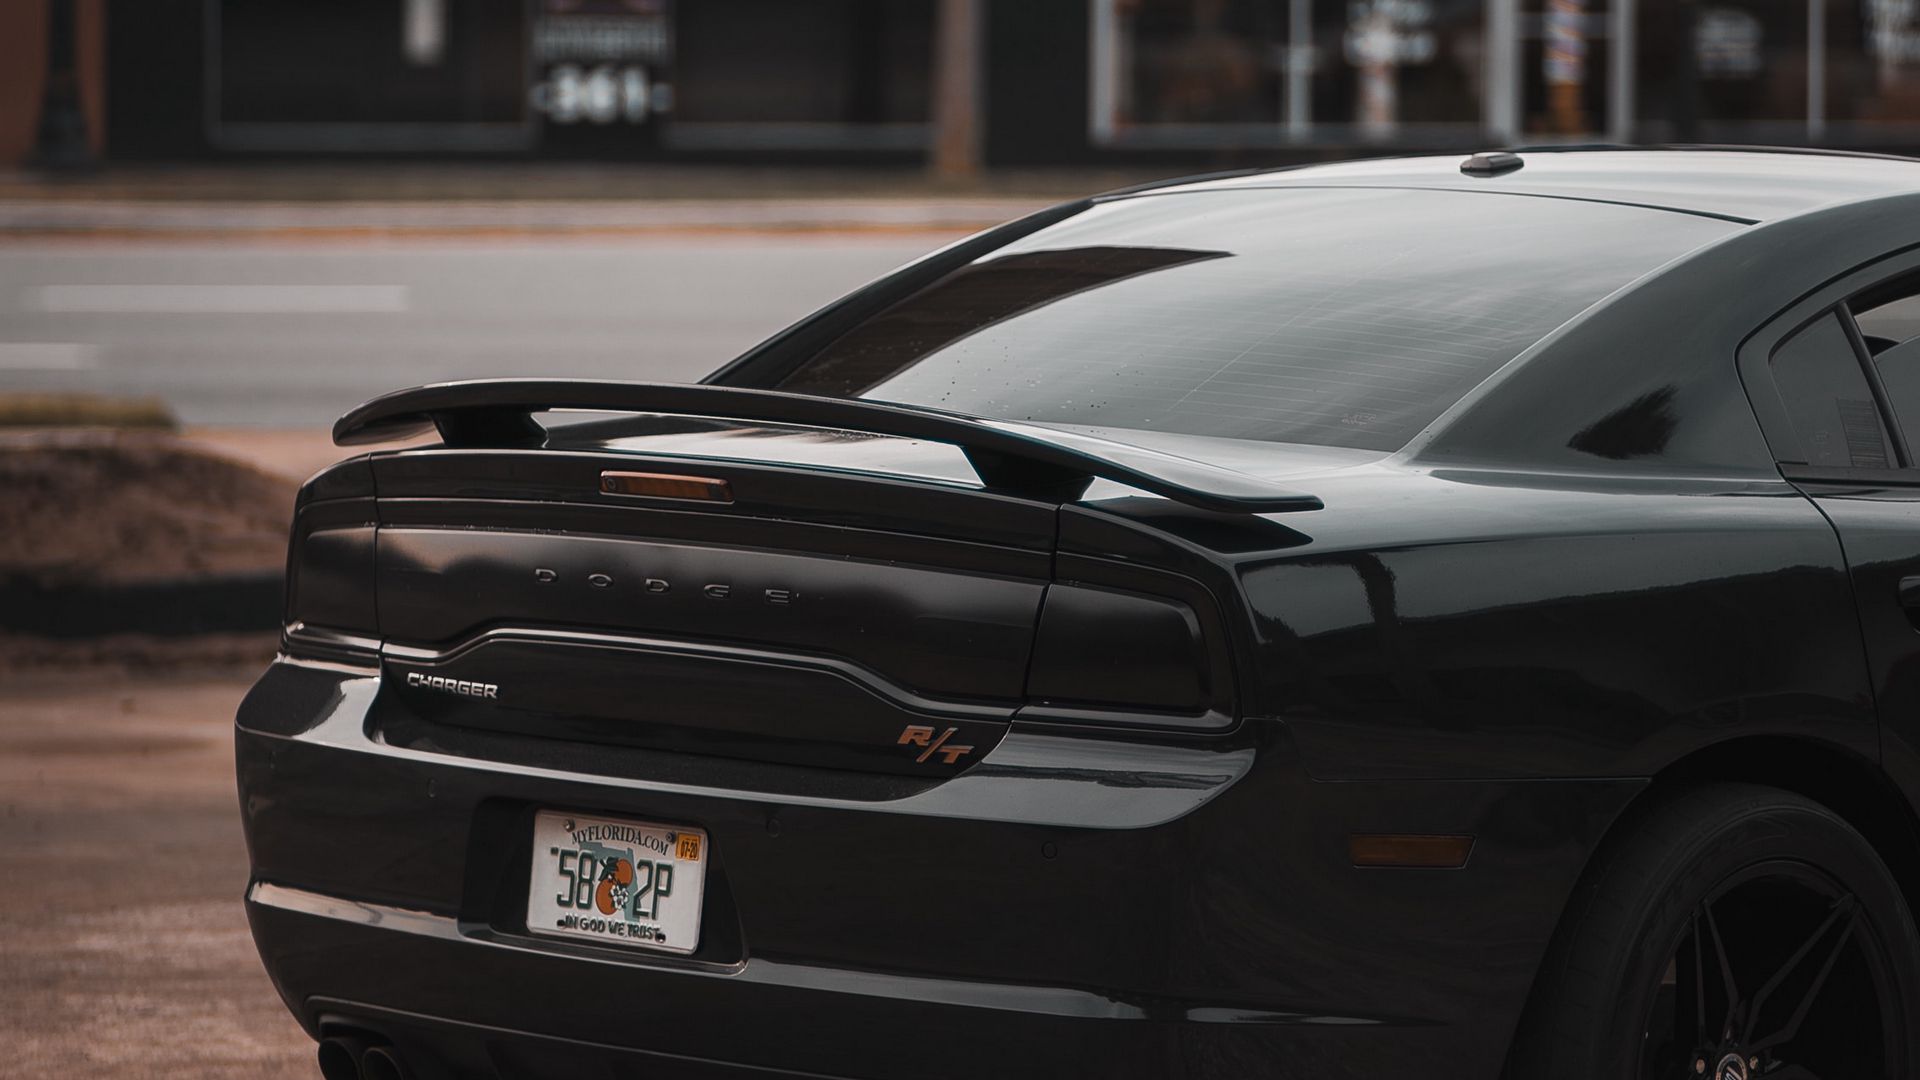 Download wallpaper 1920x1080 dodge charger, car, rear view, black full hd,  hdtv, fhd, 1080p hd background